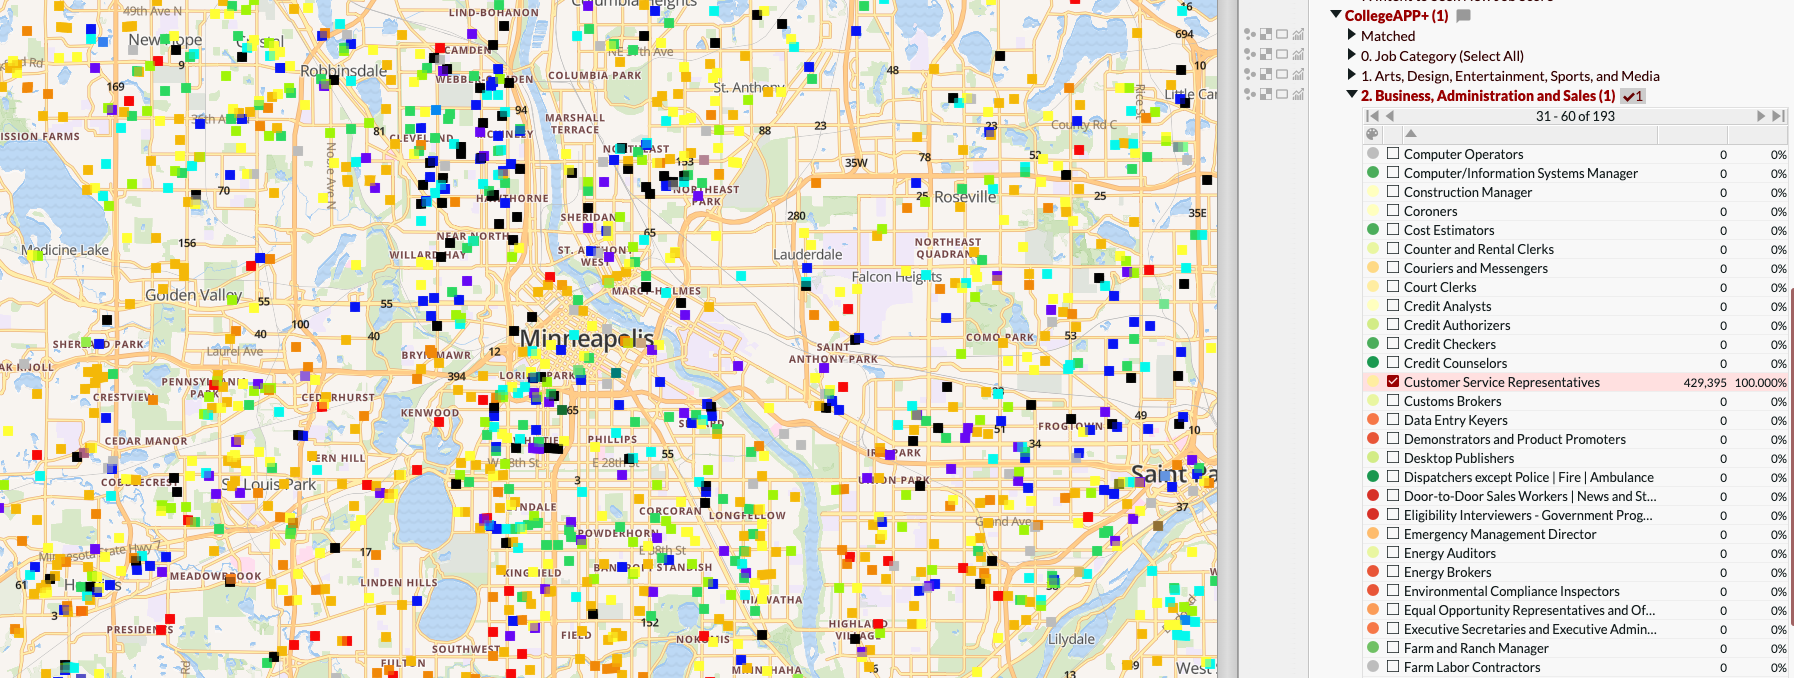 A map of individuals working as Customer Service Representatives in the Minneapolis-St. Paul region. Source: CollegeAPP+